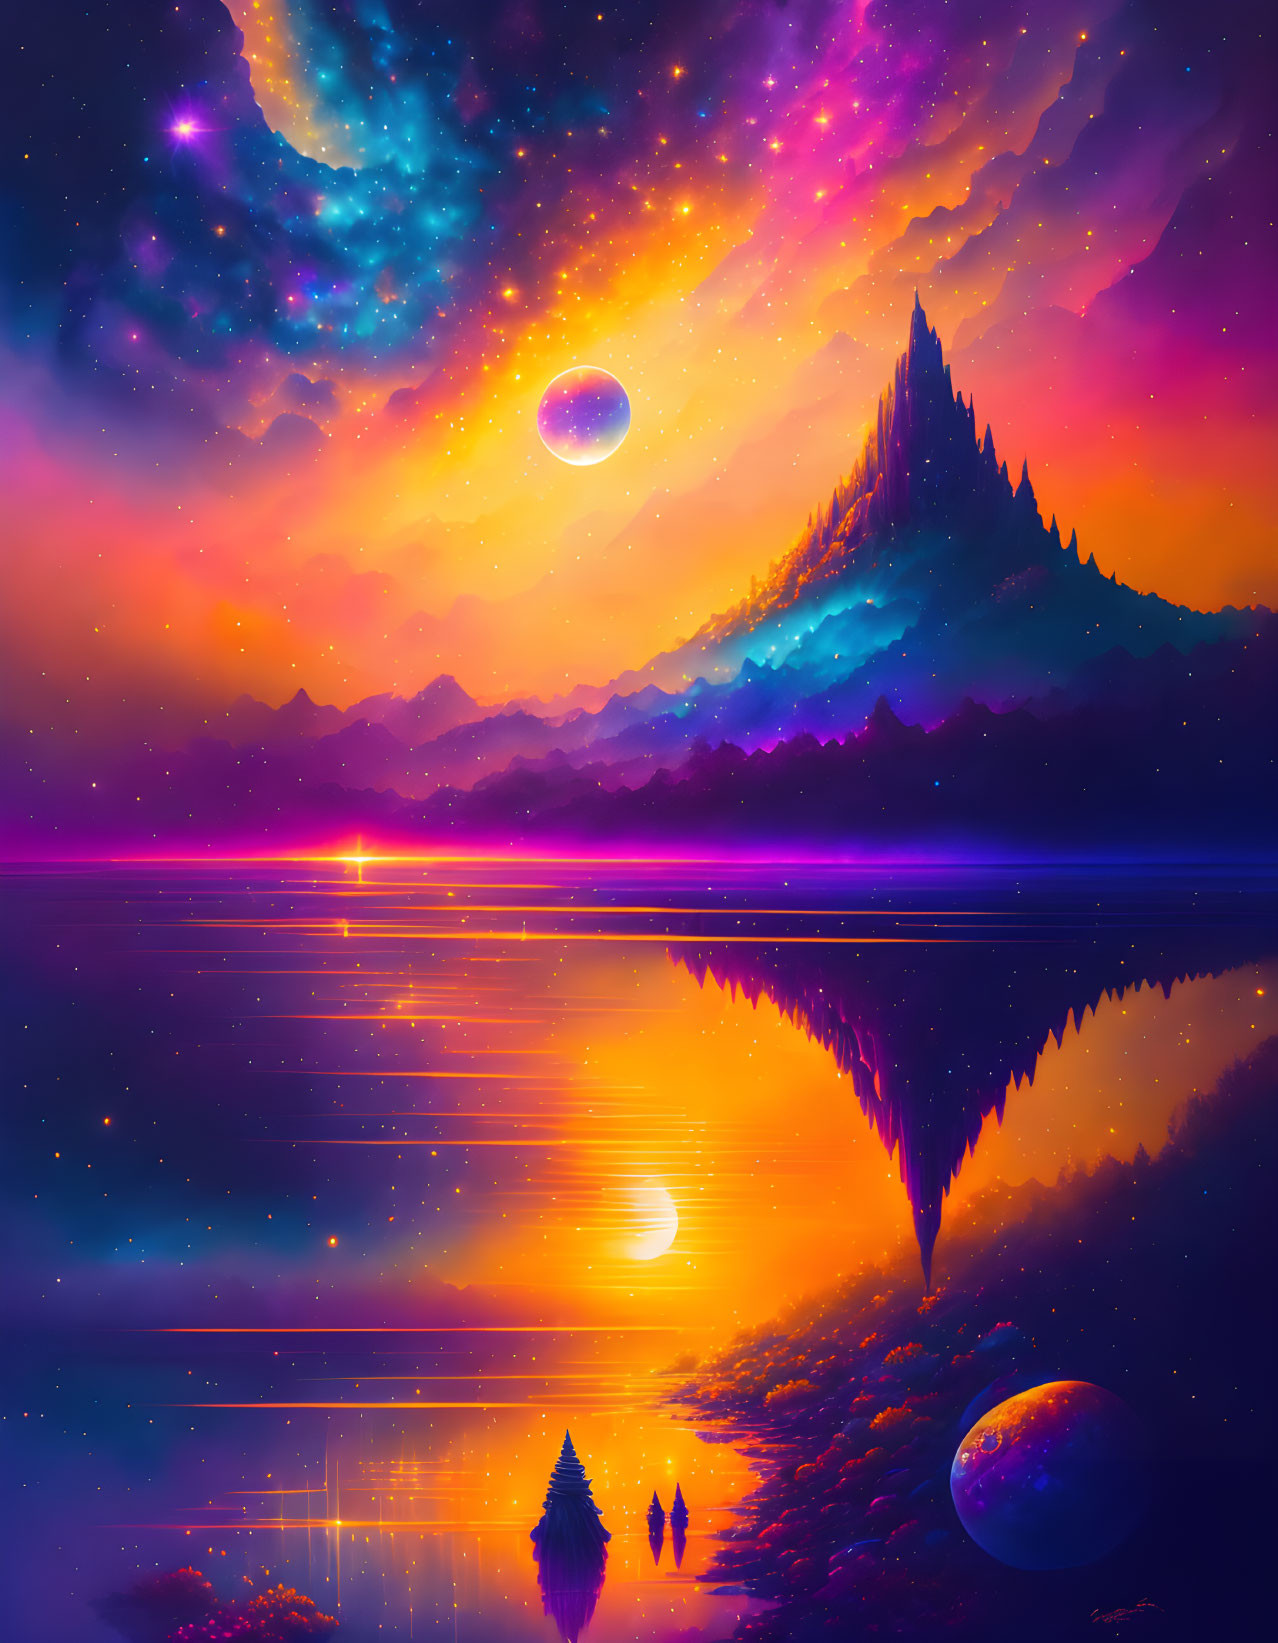 Cosmic landscape with starry sky, water reflection, celestial bodies, glowing horizon